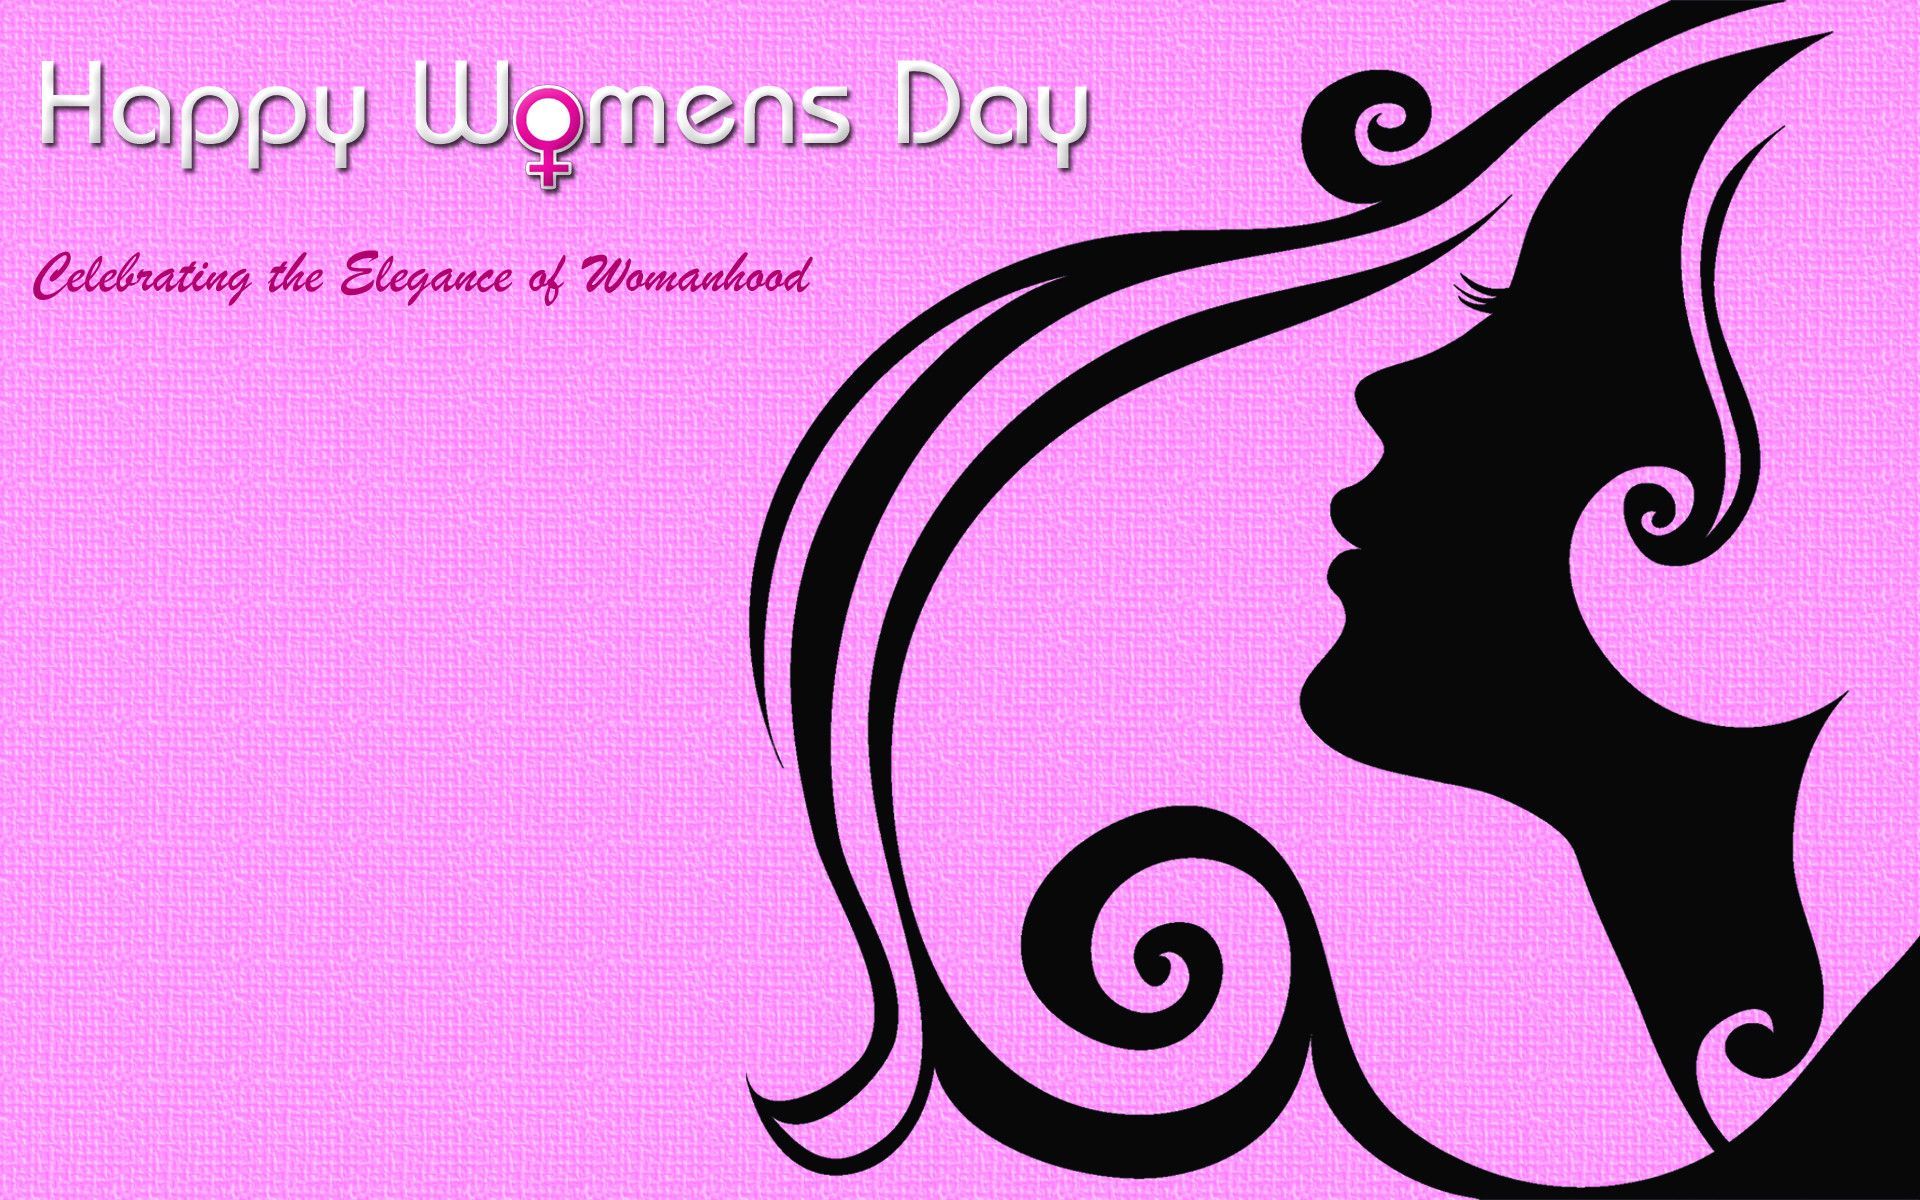 Womens Day Wallpaper 64 Best Free Womens Day Wallpaper Image For iPhone. Happy woman day, Woman day image, Womens day quotes